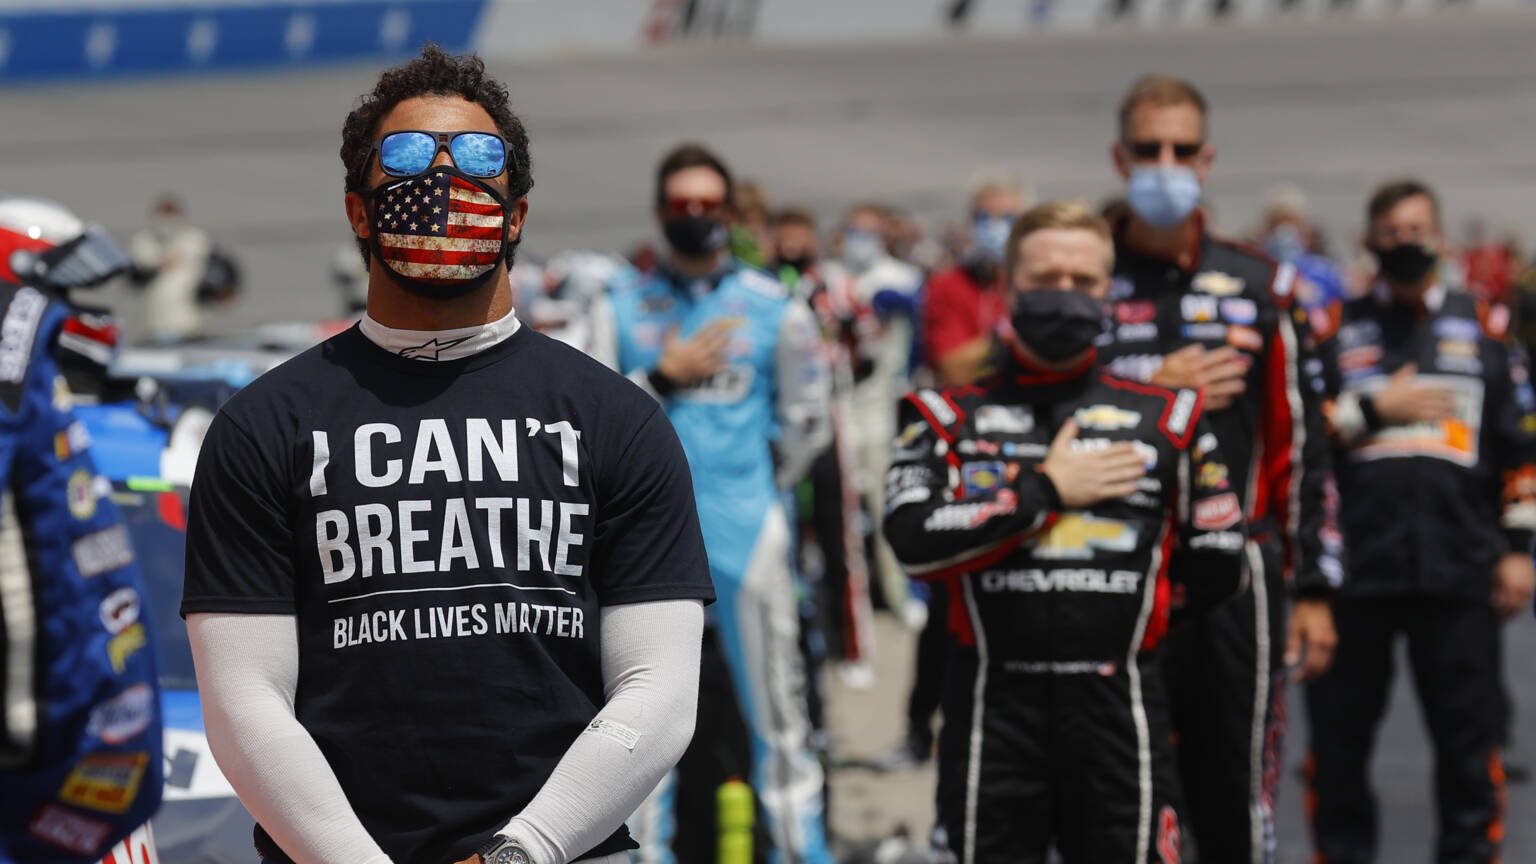 Bubba Wallace (left) wore a T-shirt referring to the death of George Floyd when singing the national anthem before a race on June 6. AFP photo